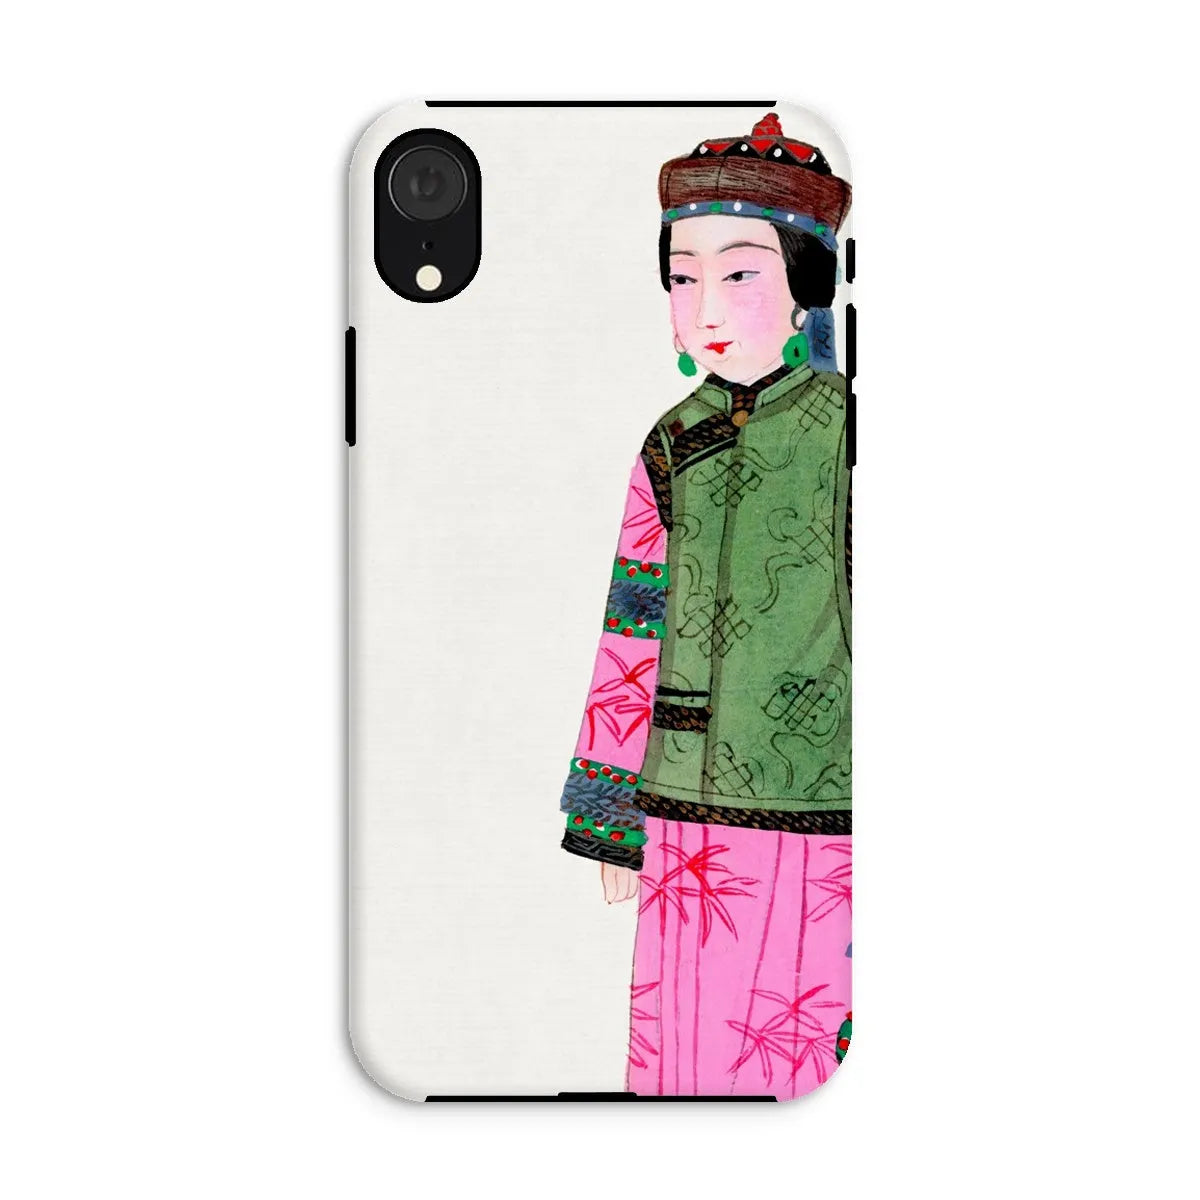 Noblewoman In Winter - Chinese Aesthetic Art Phone Case - Iphone Xr / Matte - Mobile Phone Cases - Aesthetic Art